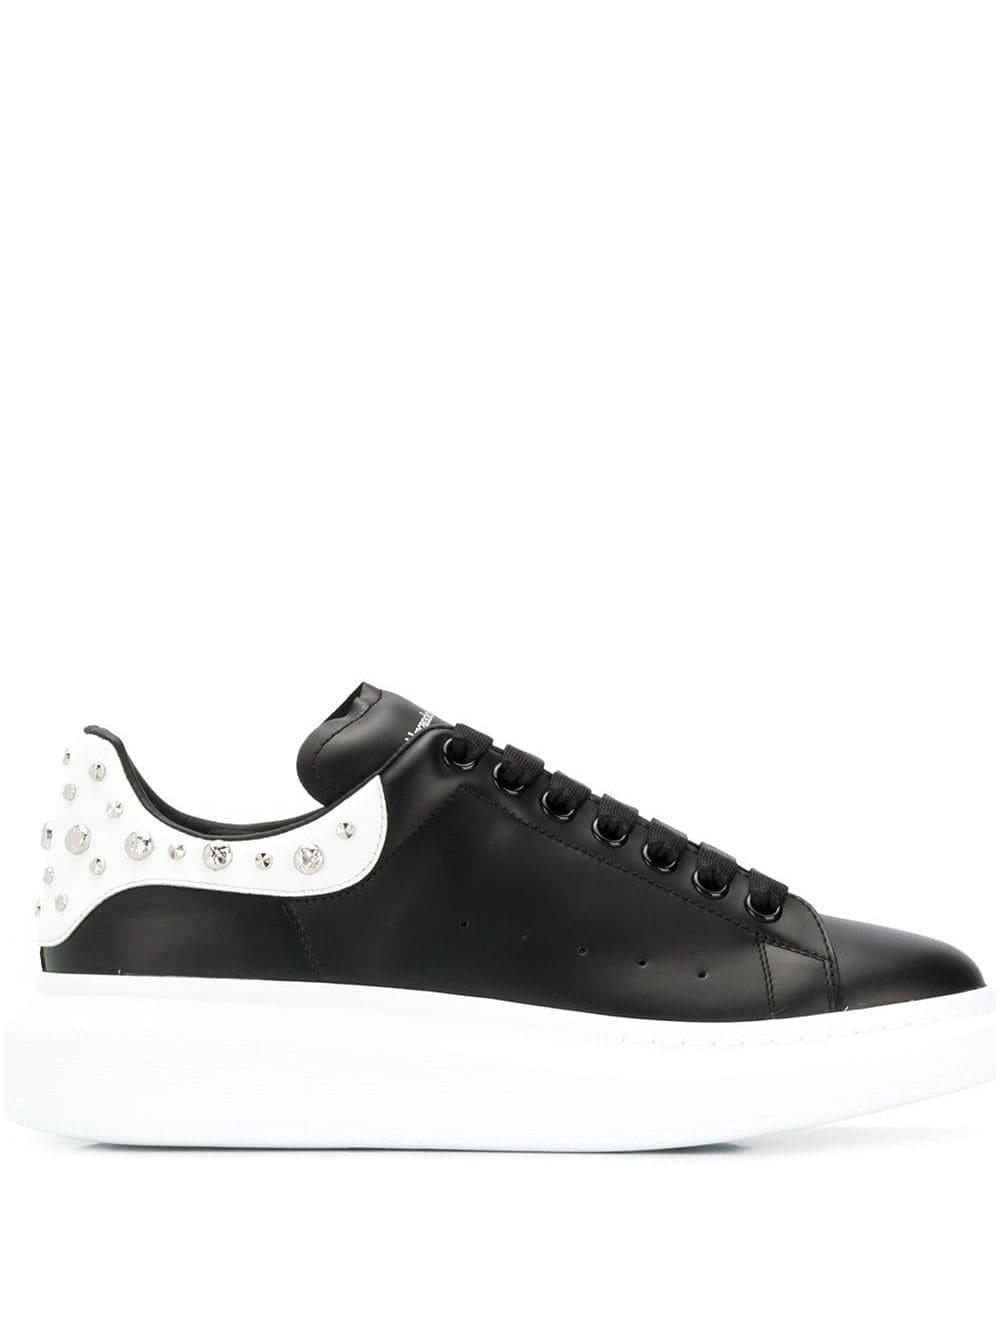 Alexander McQueen Leather Crystal Studded Sneakers in Black for Men ...